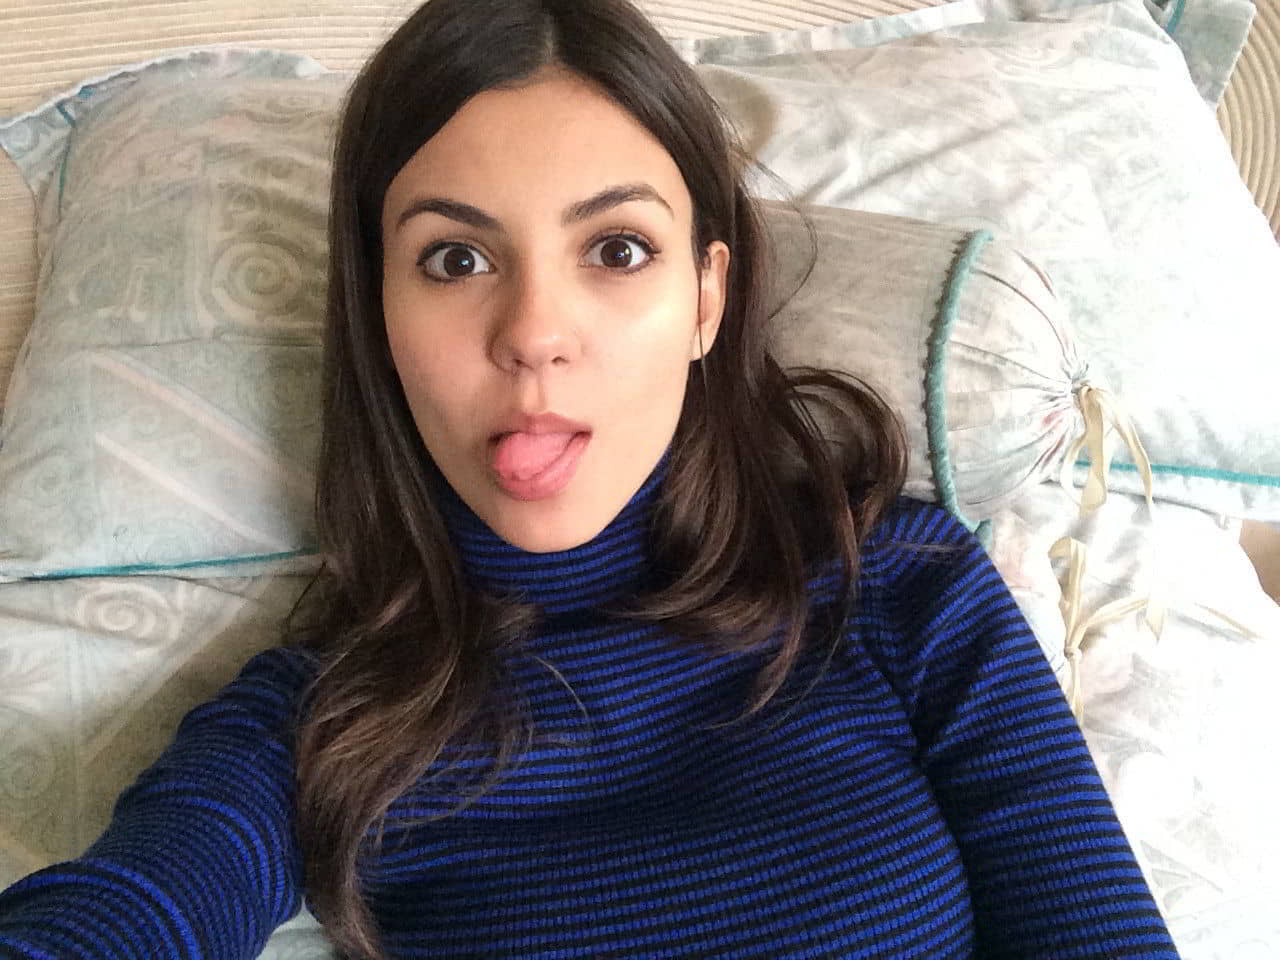 victoria-justice-leaked-cellphone-pictures-18.jpg